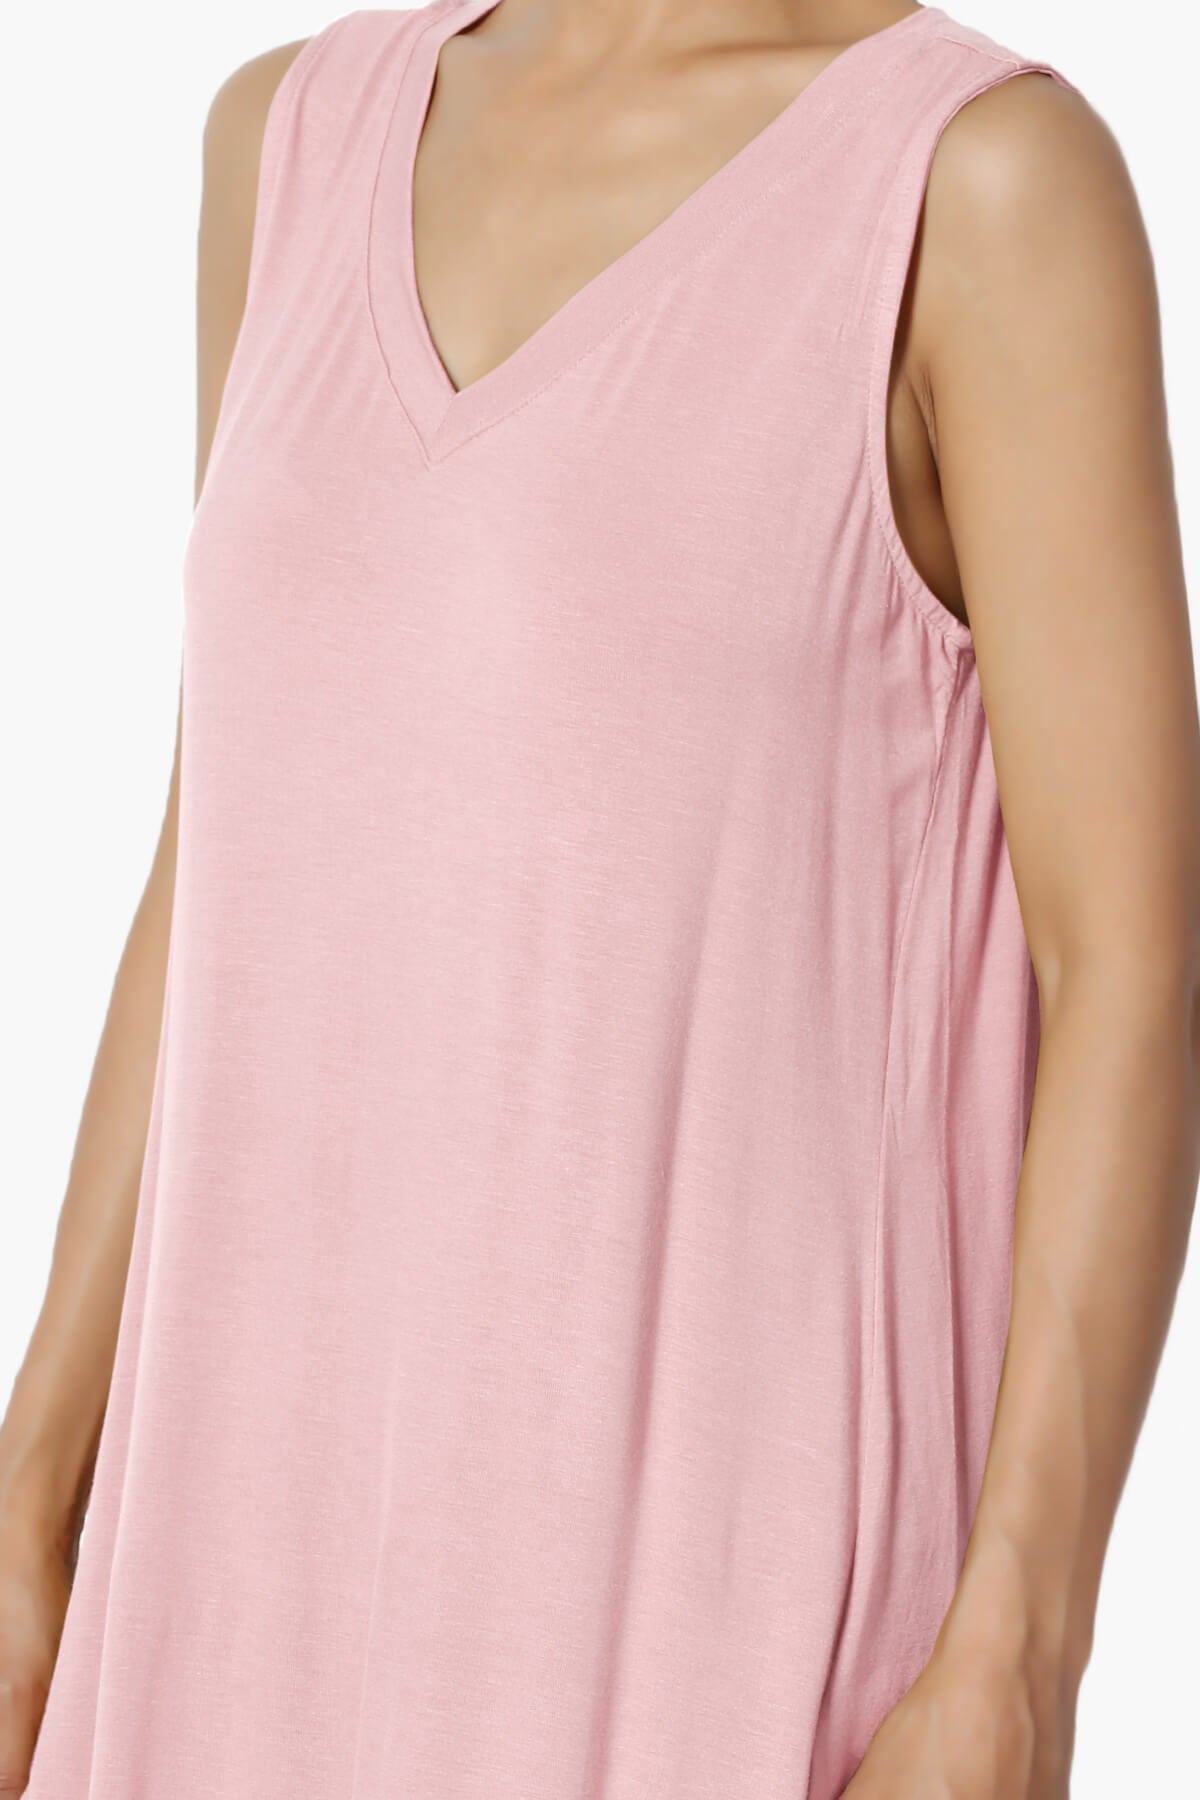 Load image into Gallery viewer, Myles Sleeveless V-Neck Luxe Jersey Top DUSTY PINK_5
